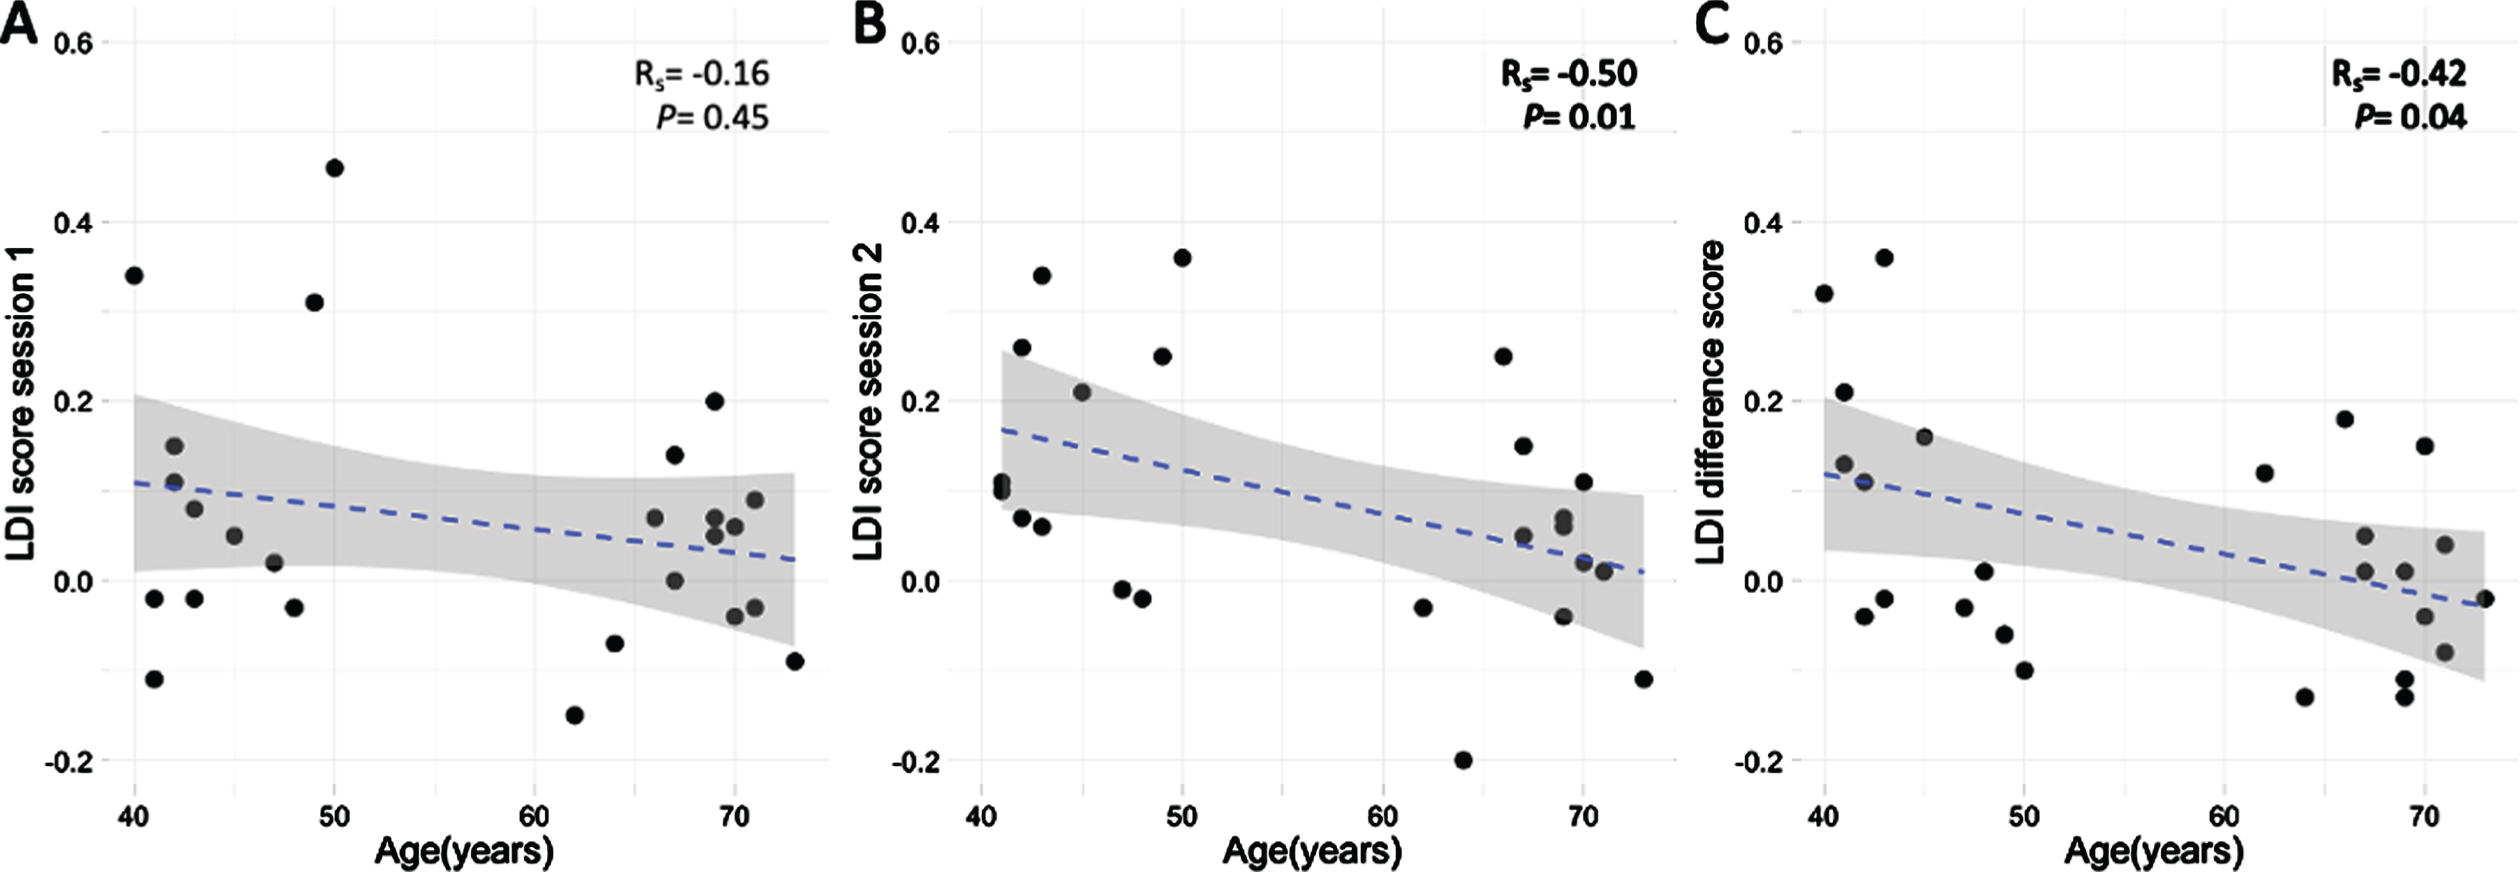 A) LDI scores over time plotted for non-leaners (red) and learners (blue). B) For learners, the interaction between age and SAA levels after encoding, showed that in younger individuals, lower sAA levels after encoding were associated with higher practice effects, whereas there was no relationship between sAA and practice effects in the older participants. C) For non-learners, no interaction was found between age and SAA levels after encoding on practice effects. In B and C, sAA at baseline was added as covariate. Age as a continuous variable is depicted in the figures with simple slopes representing the median of the middle aged (43 years old) and older adults (69 years old).